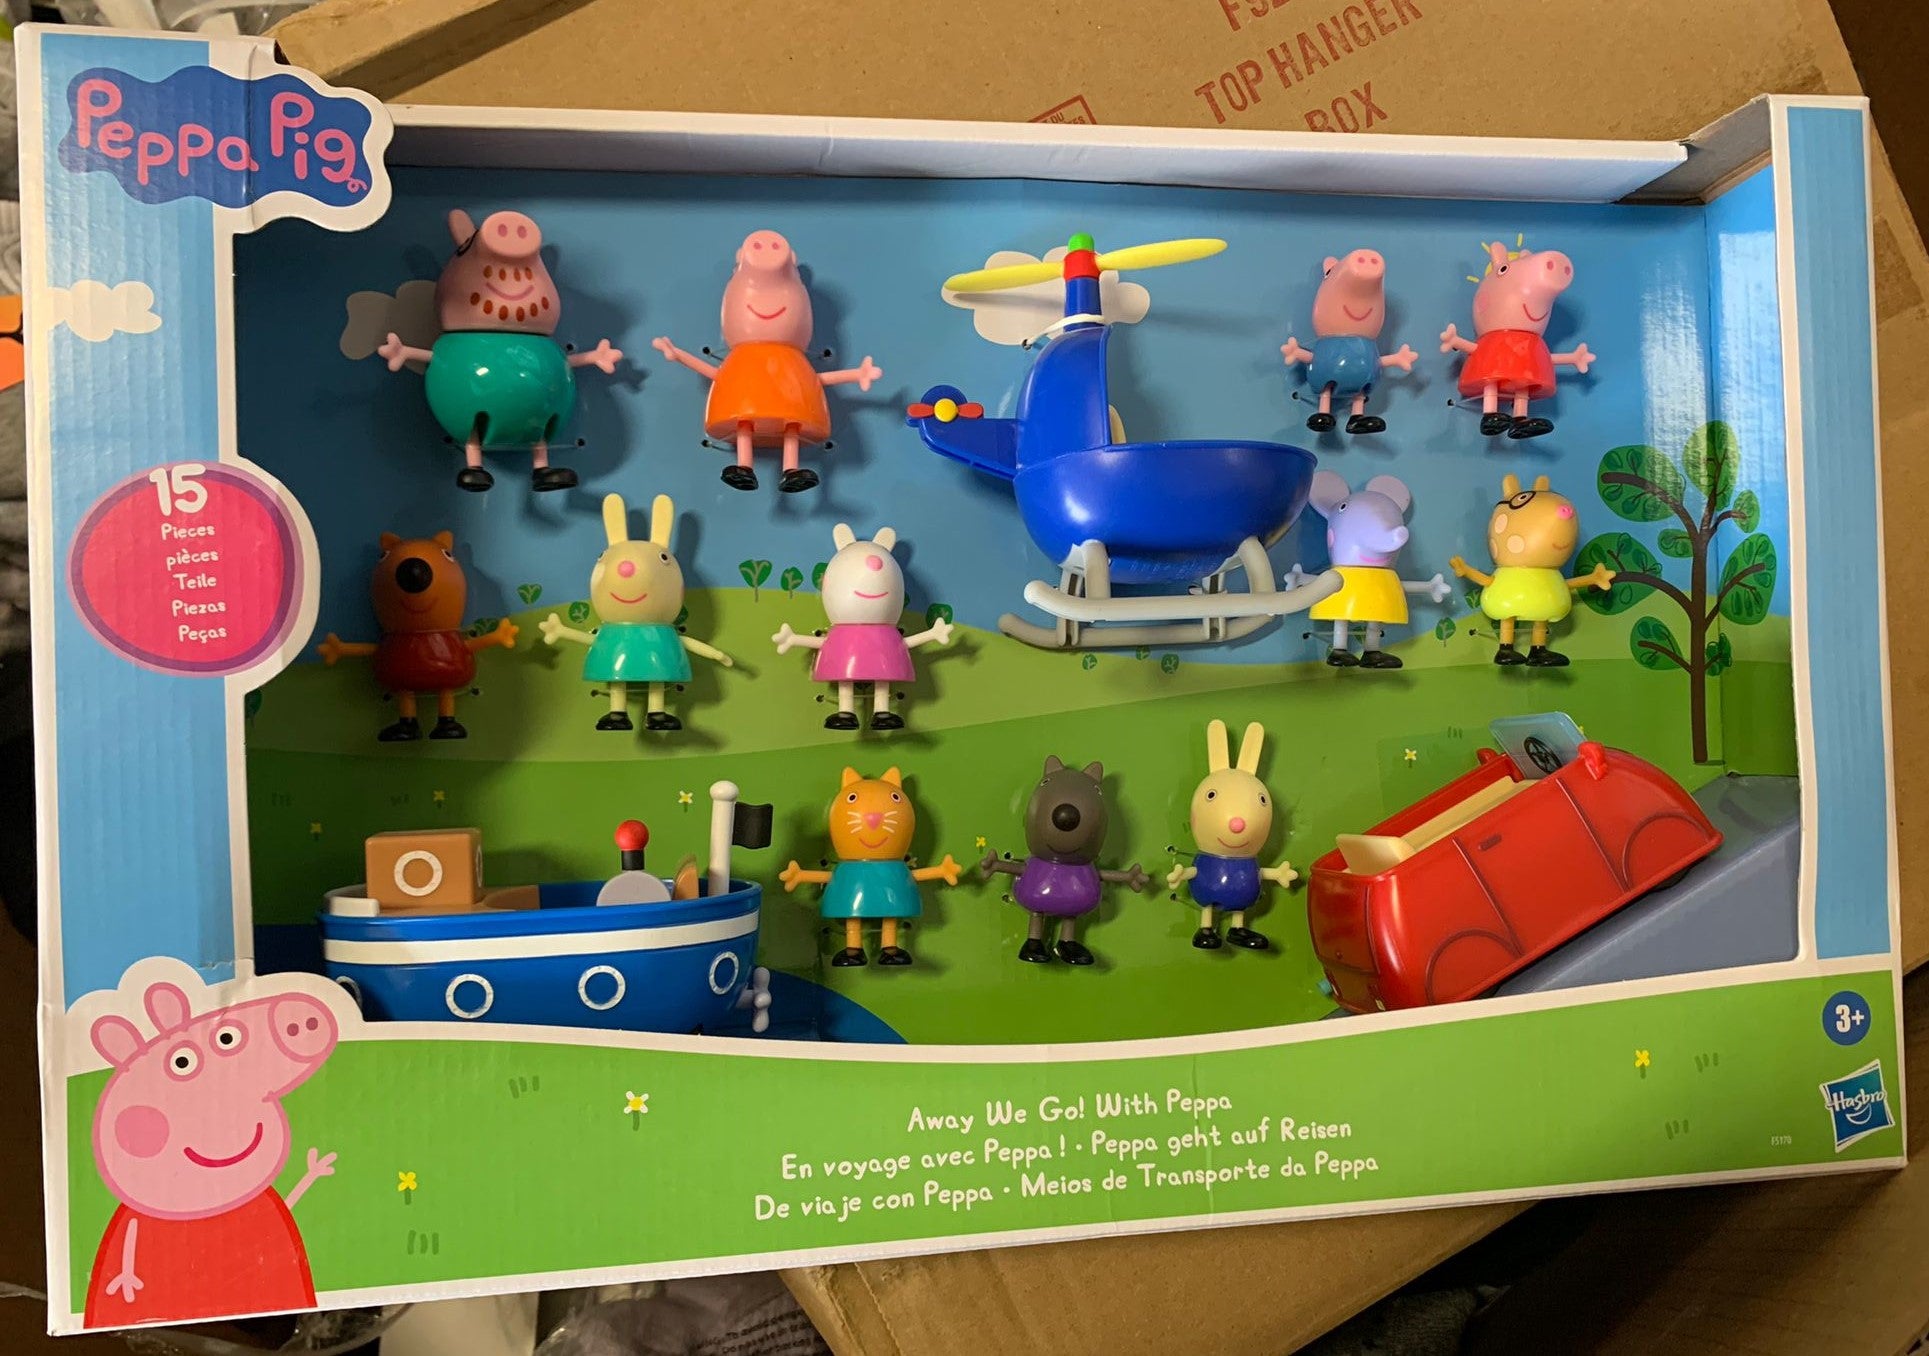 Away We Go! With Peppa Pig